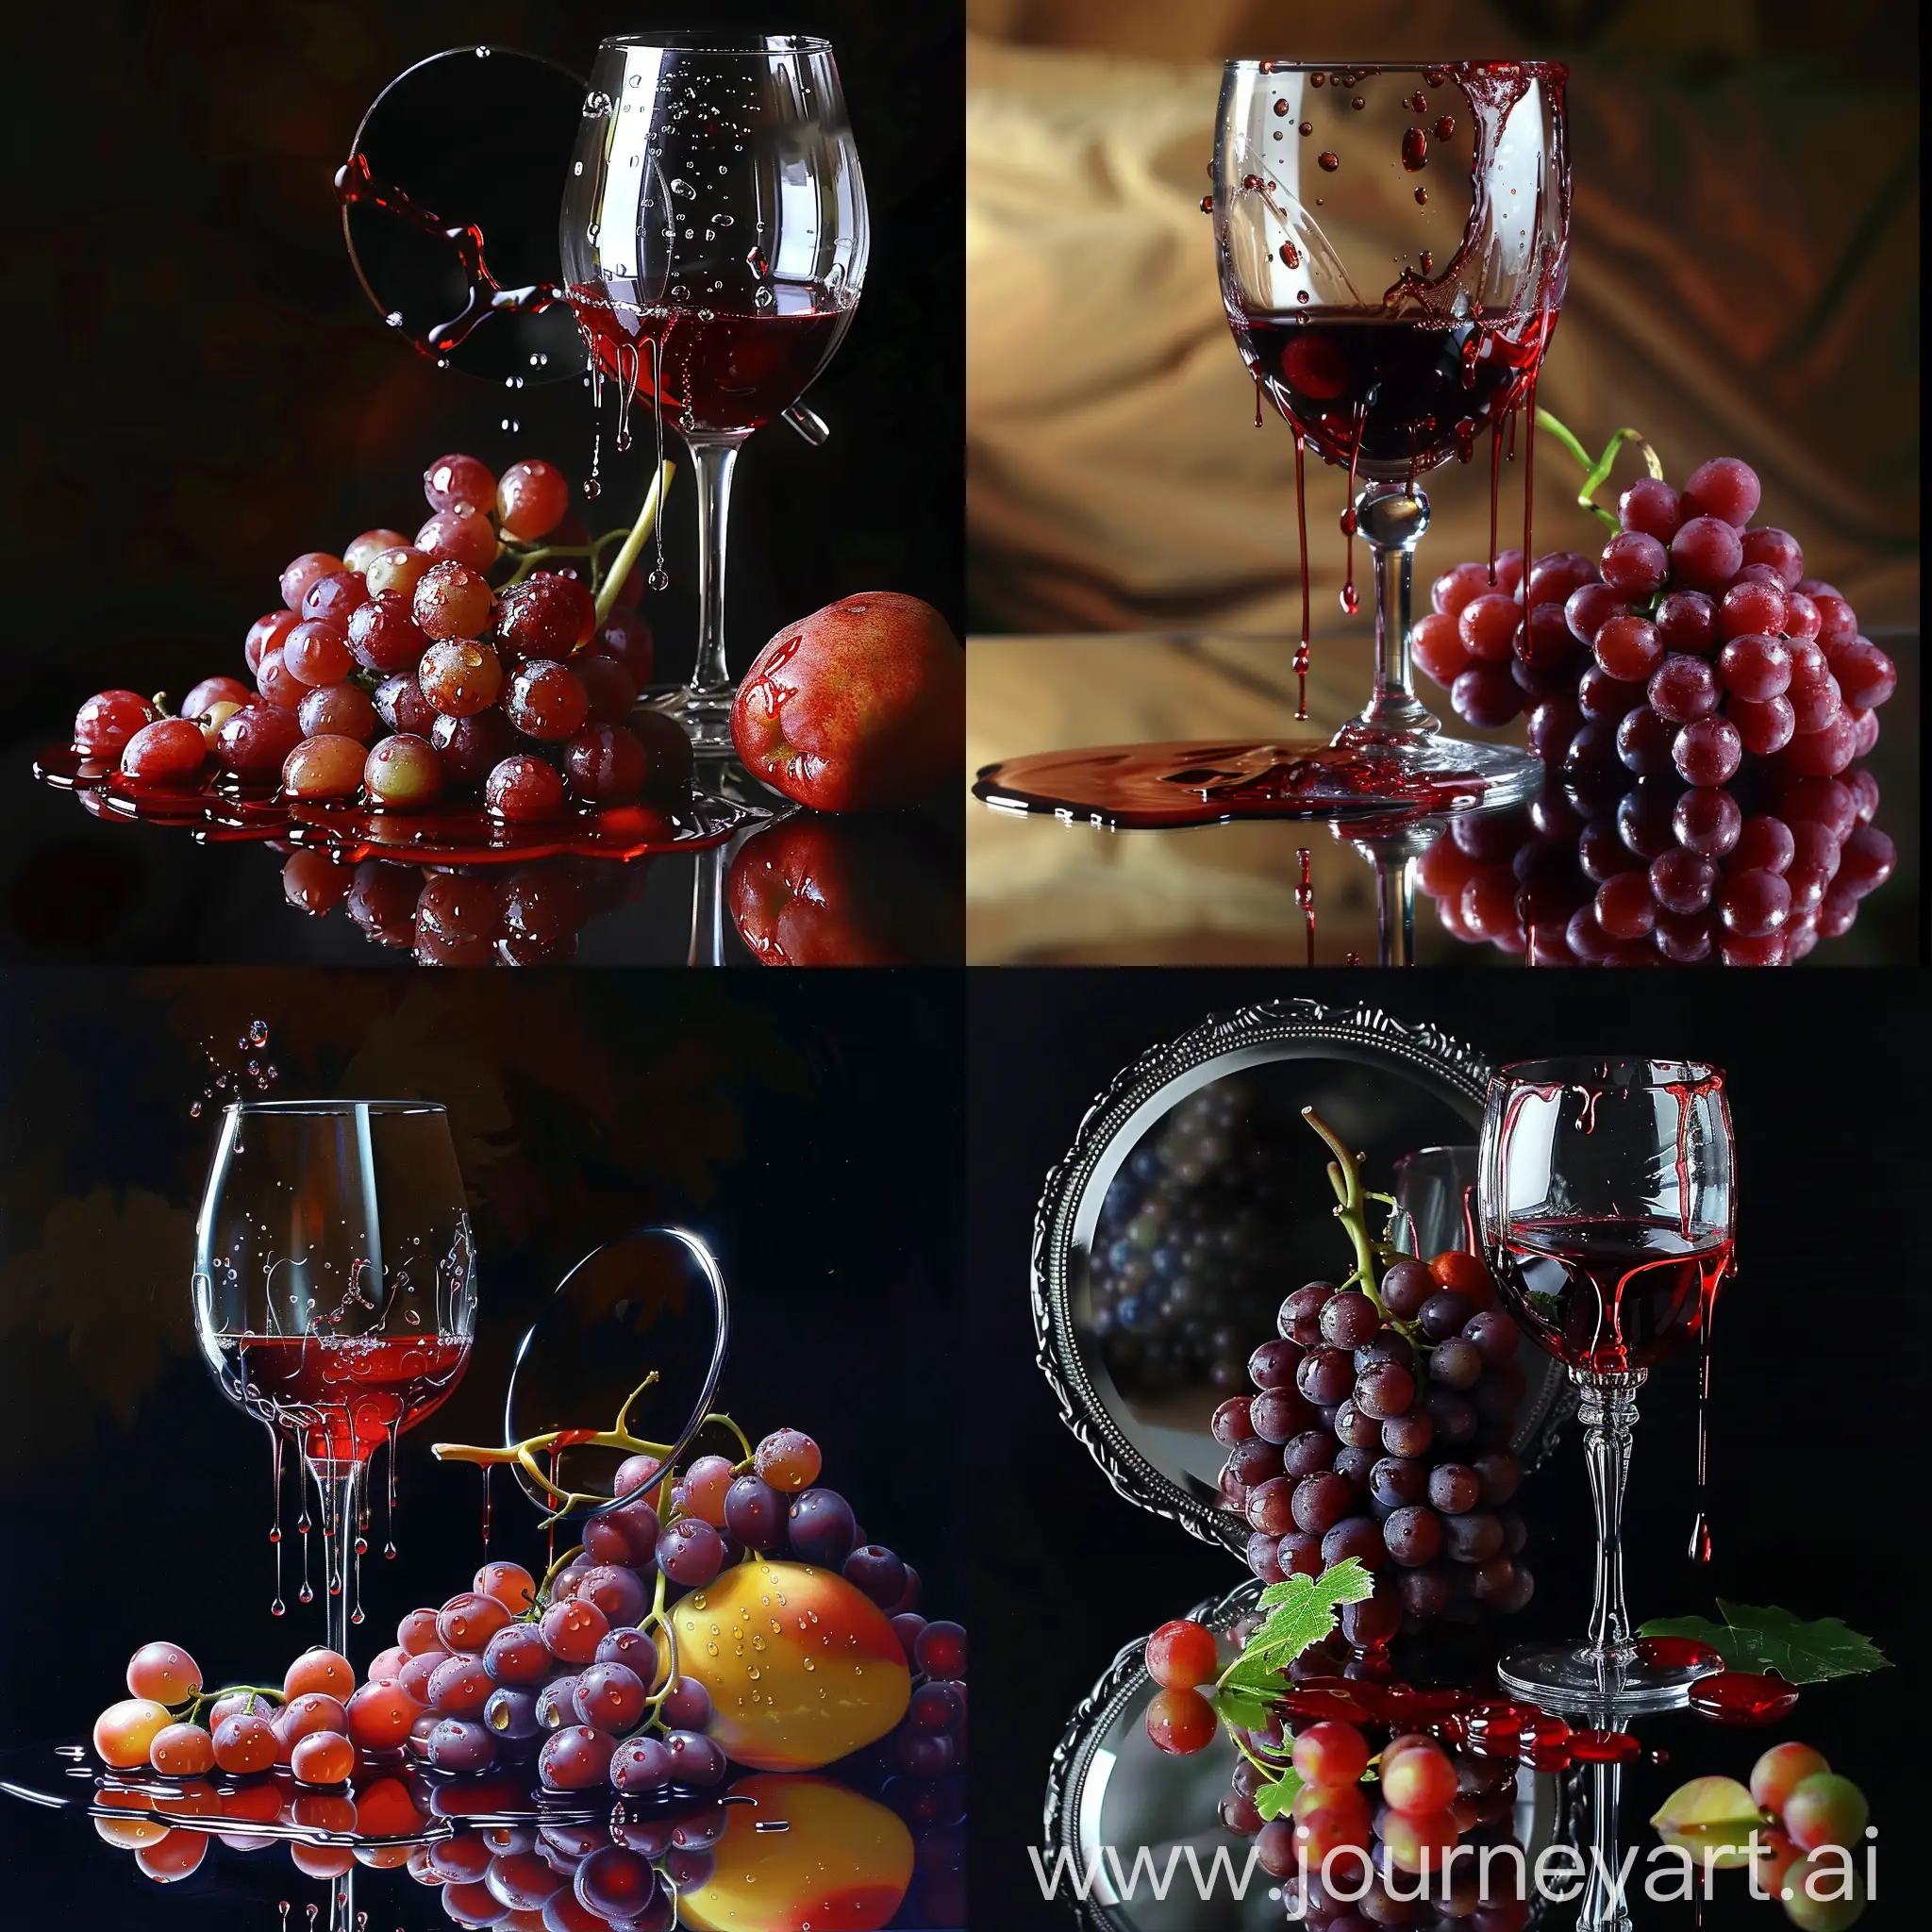 Surreal-Wine-Glass-with-Dripping-Grapes-and-Red-Wine-Hyperrealistic-Photography-by-Albert-Watson